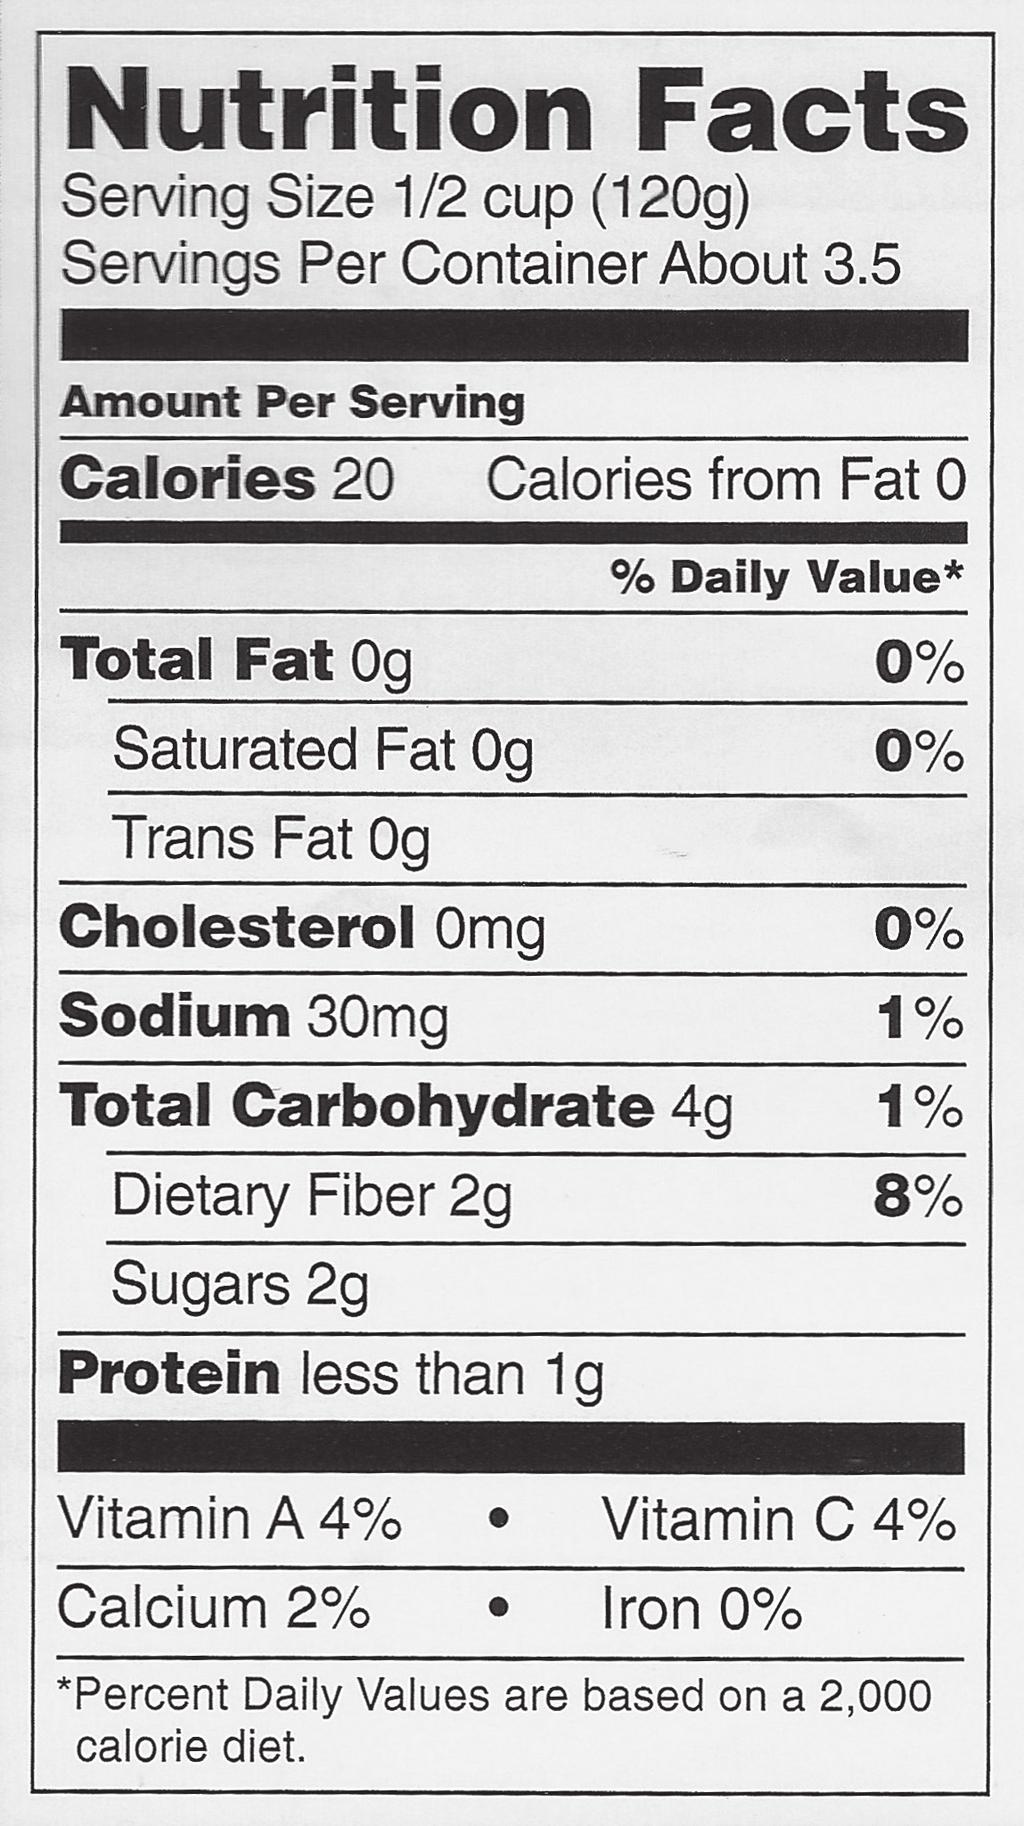 How to Eat Less Salt Reading a Food Label Step 1: Look at the serving size Step 2: Look at the sodium per serving Step 3: choose